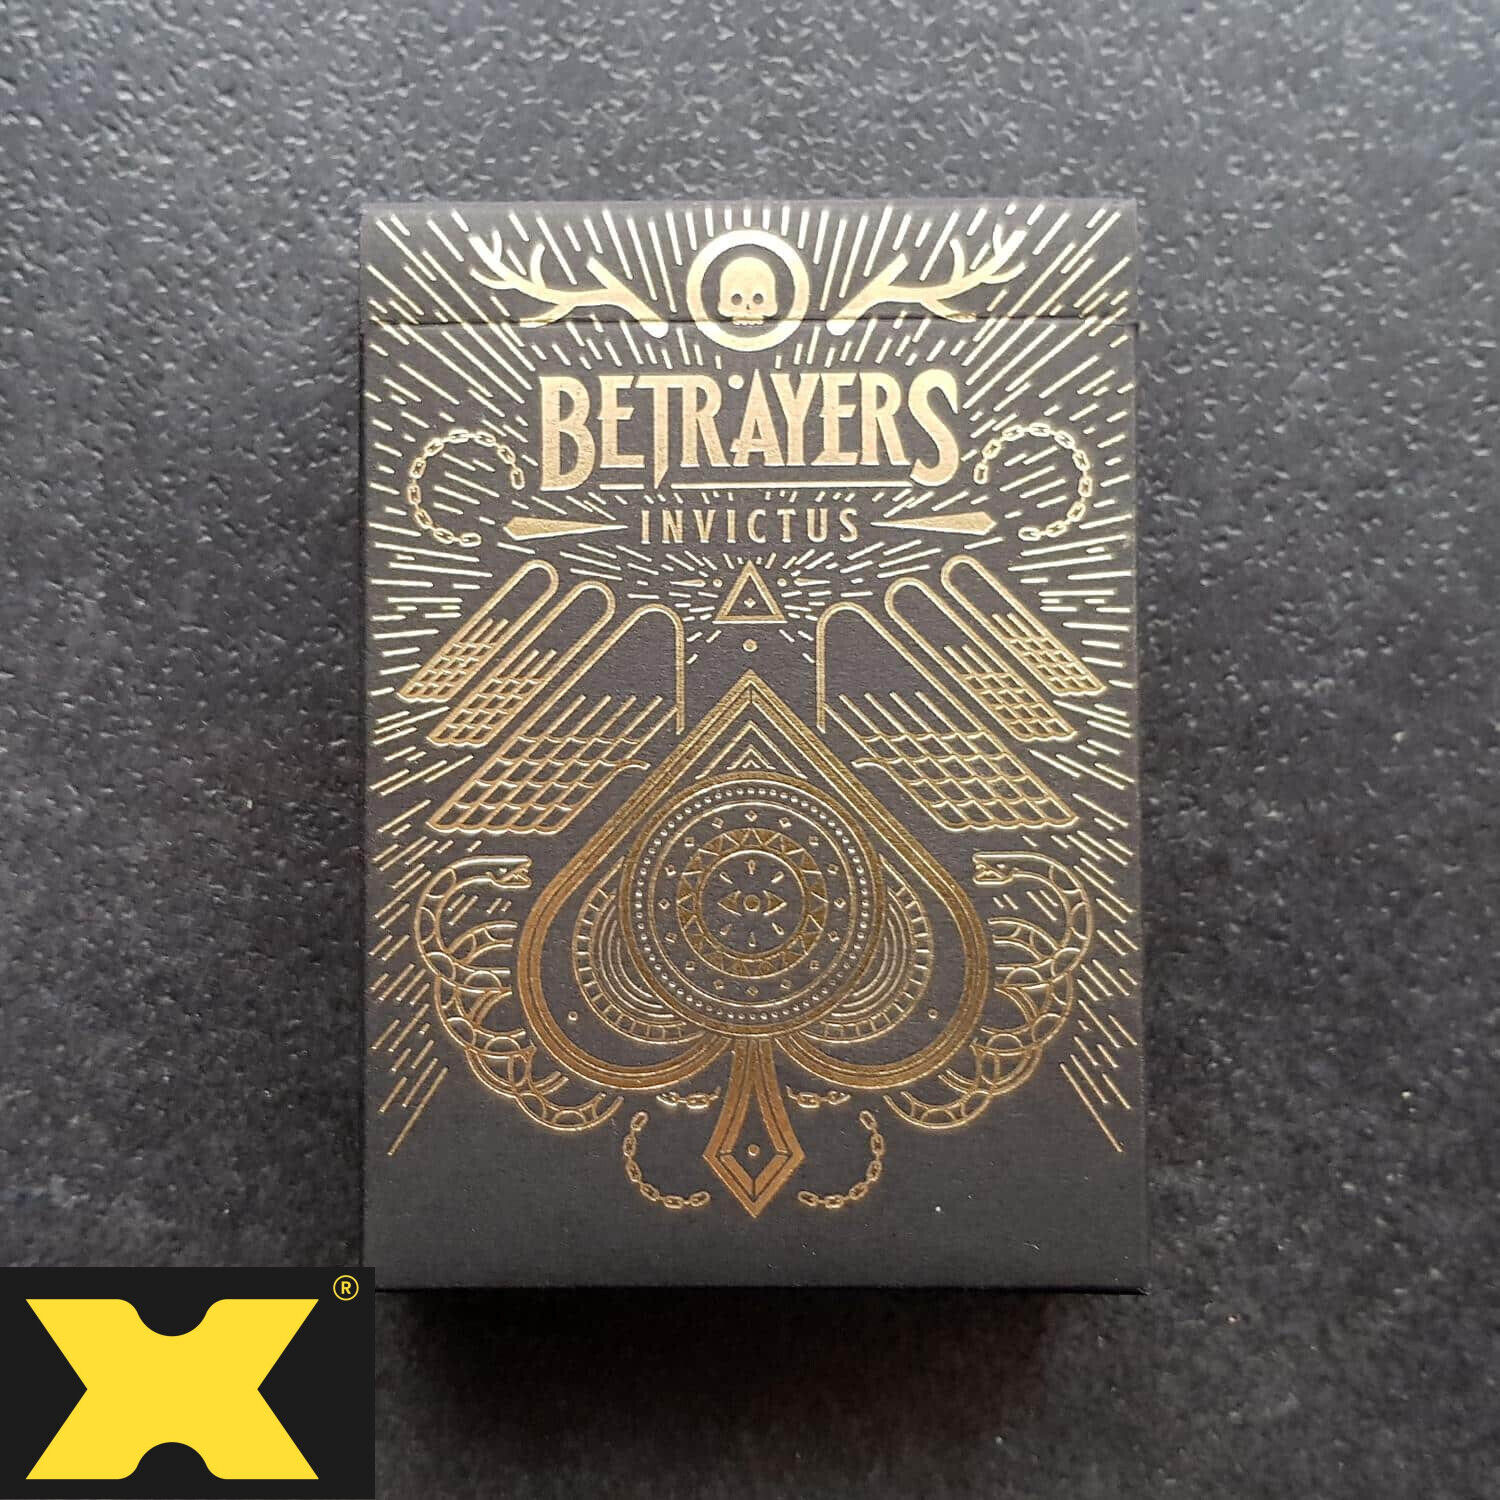 Betrayers Invictus (Black) by Giovanni Meroni/Thirdway Industries